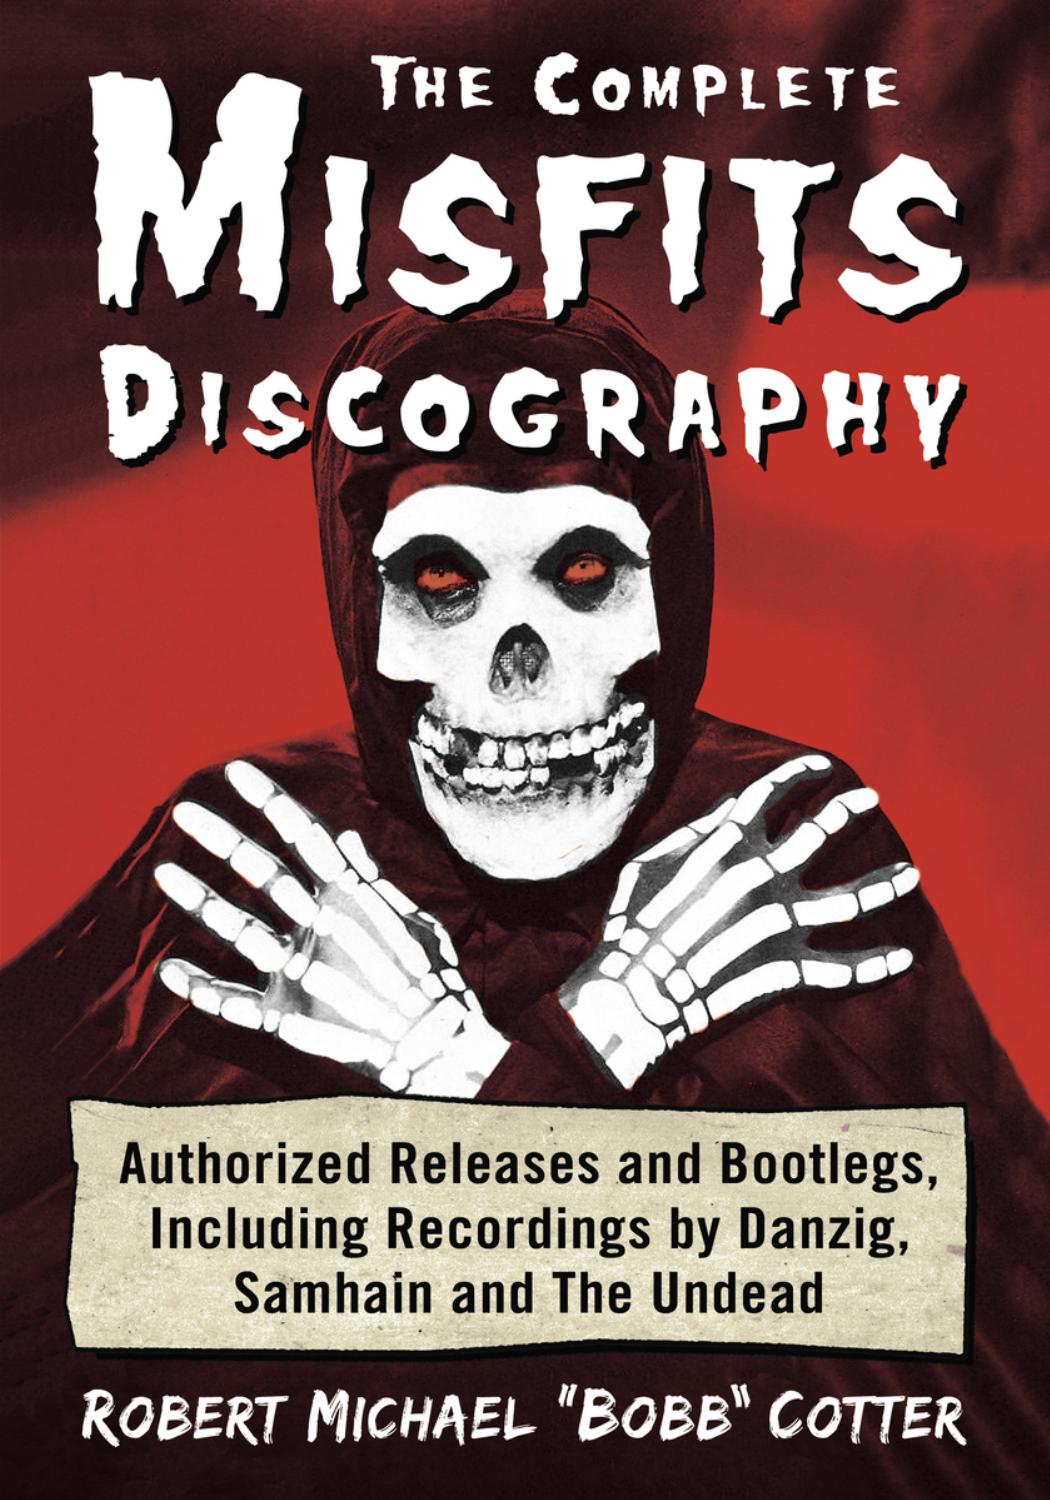 The Complete Misfits Discography: Authorized Releases and Bootlegs, Including Recordings by Danzig, Samhain and the Undead by Robert Michael Bobb Cotter